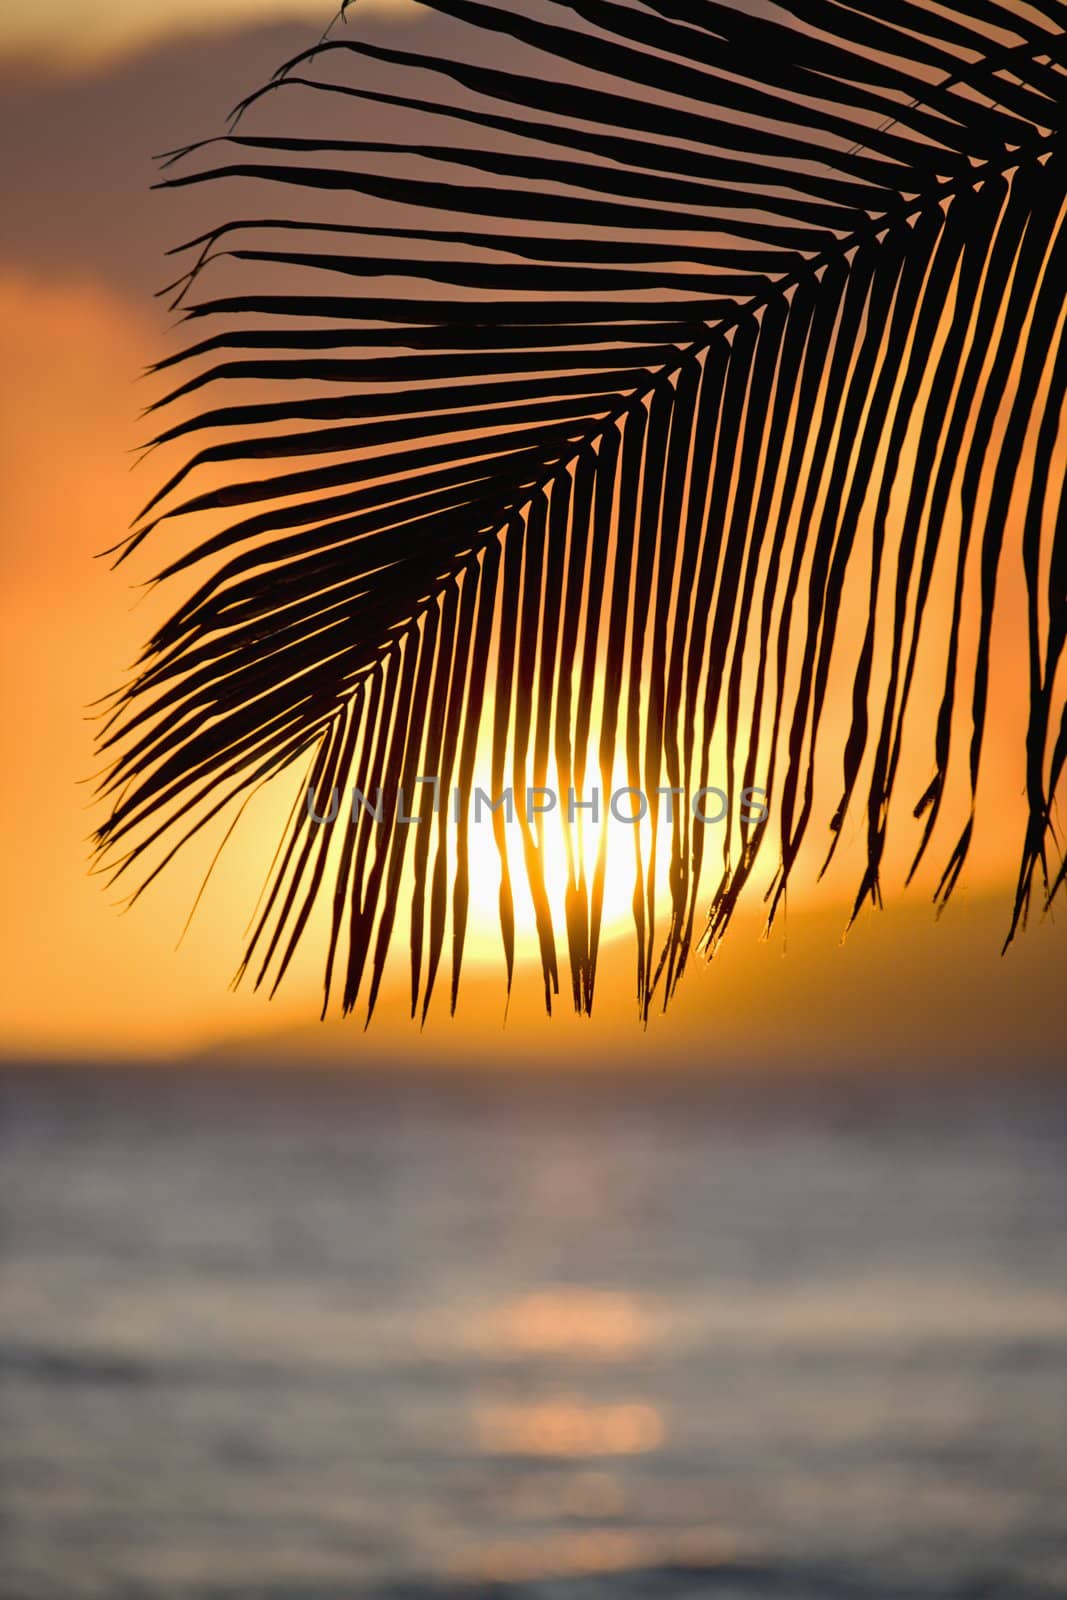 Sunset over ocean with palm frond silhouette at Maui, Hawaii.